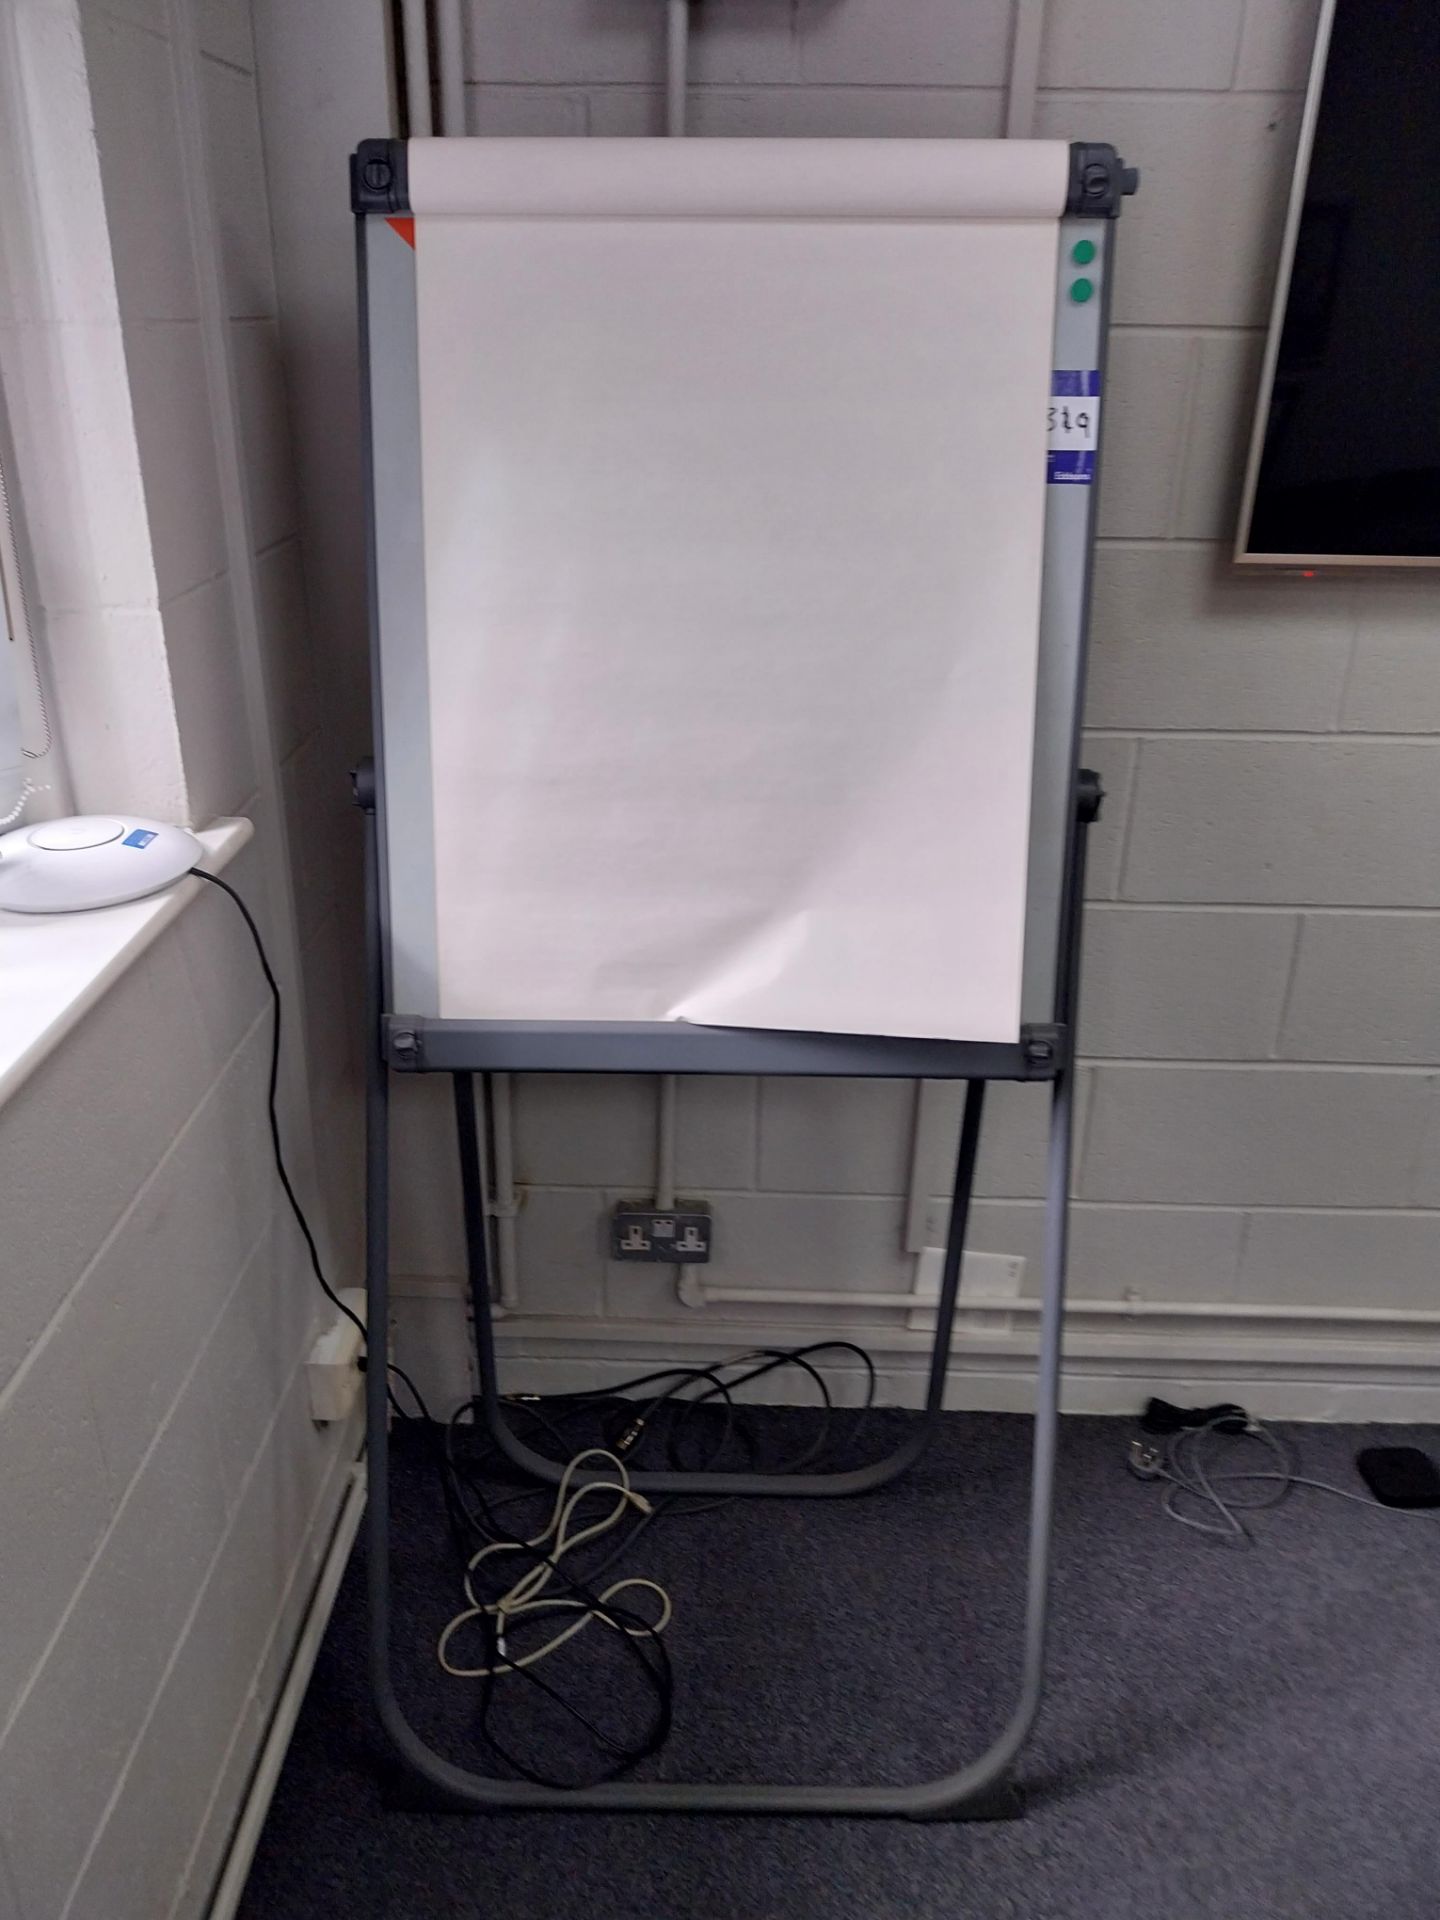 Expand Media advertisement unit to plastic mobile case and flip chart - Image 3 of 3